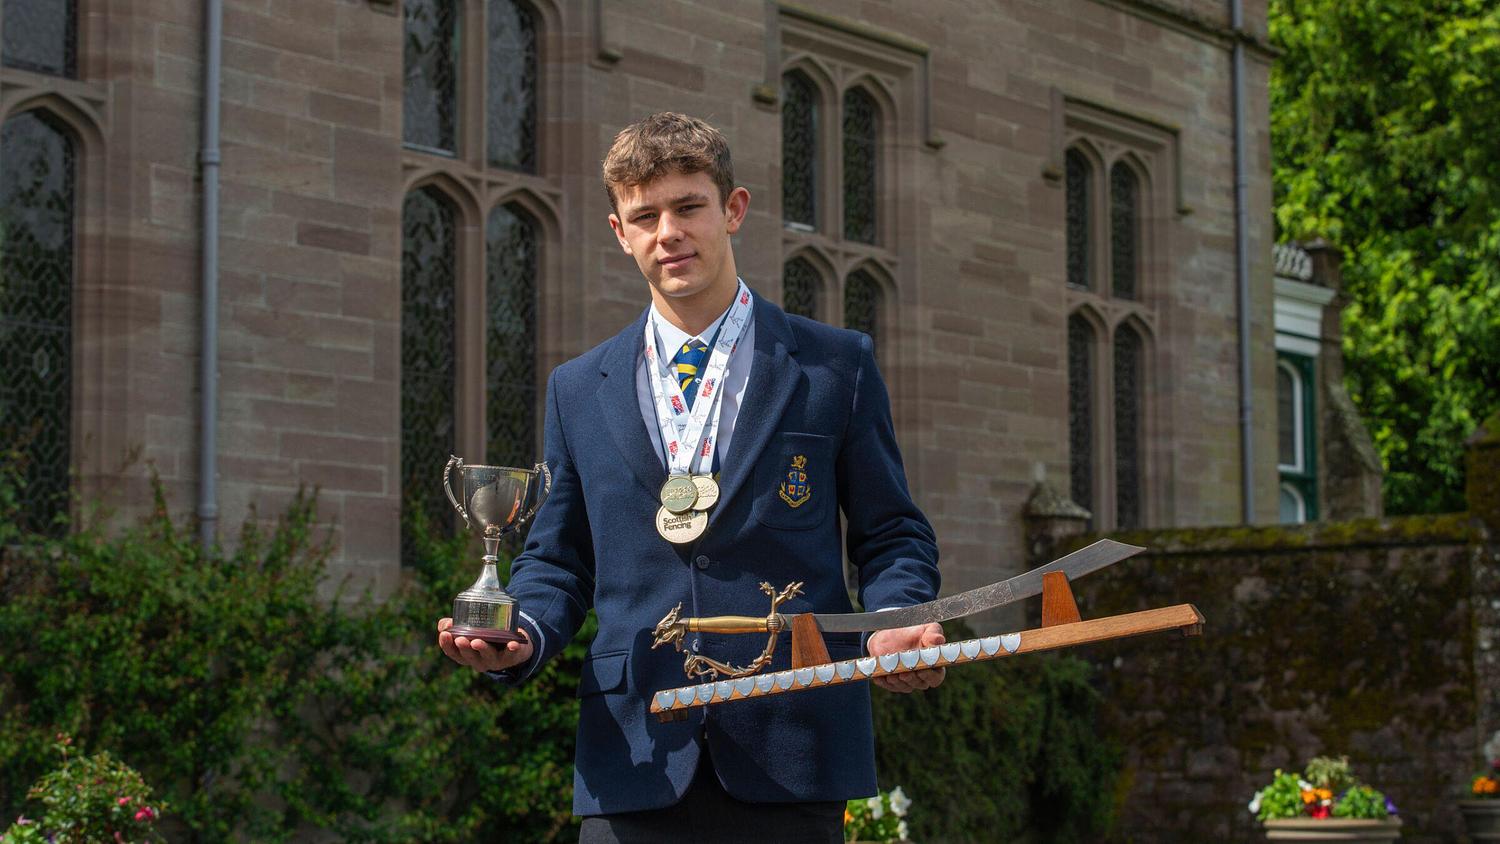 Joshua secures British and Scottish Fencing crowns